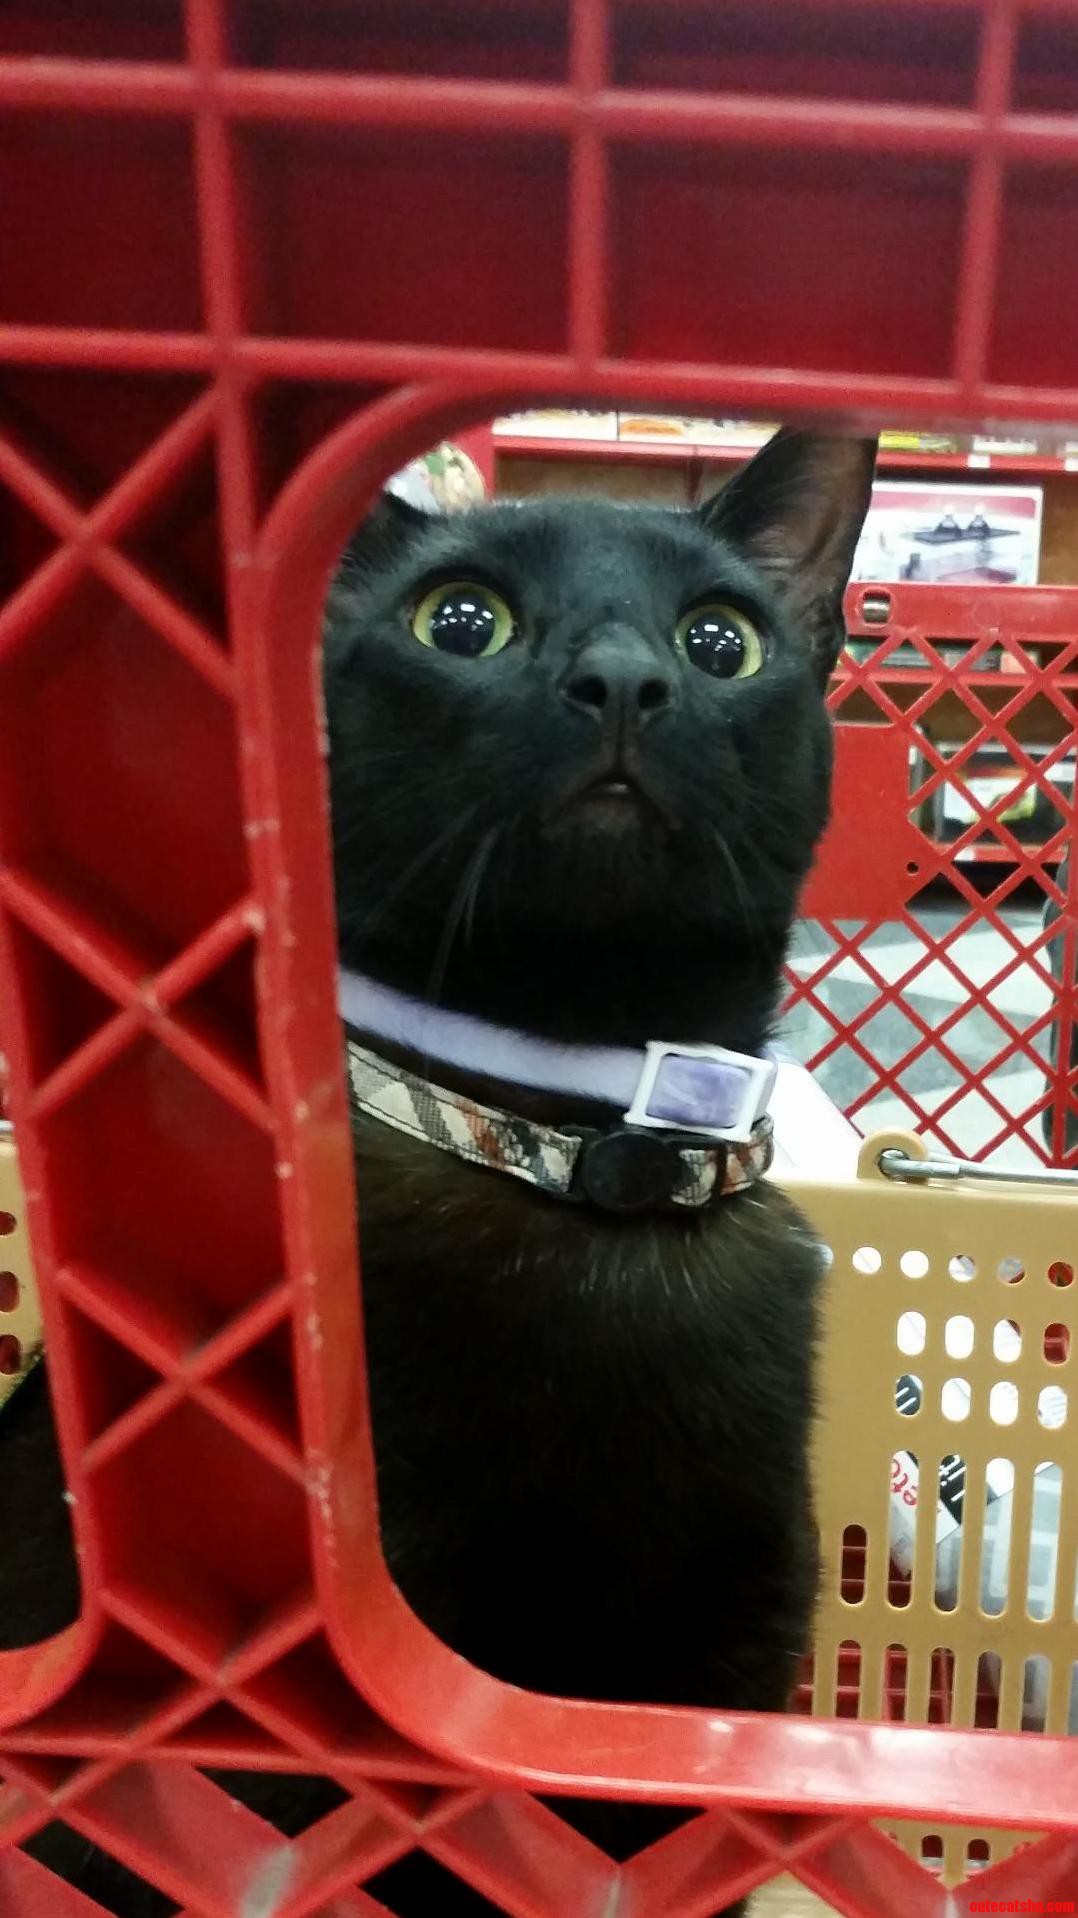 This Is My Cat Jasper. This Is His First Time At The Pet Store.